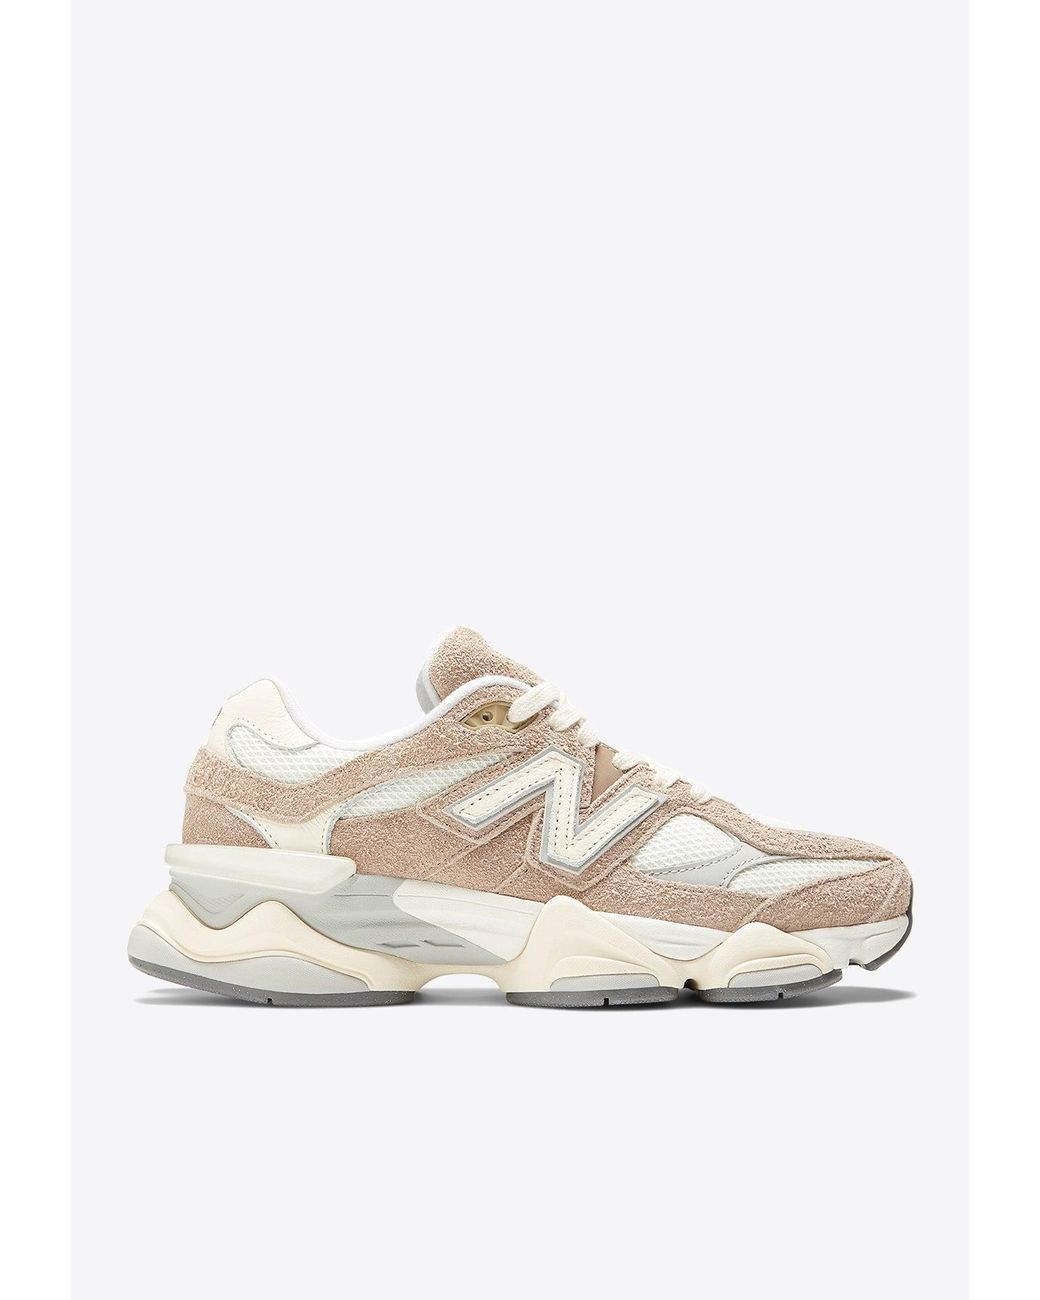 New Balance 9060 Low-top Sneakers In Driftwood With Stone Pink And Sea Salt  in White | Lyst